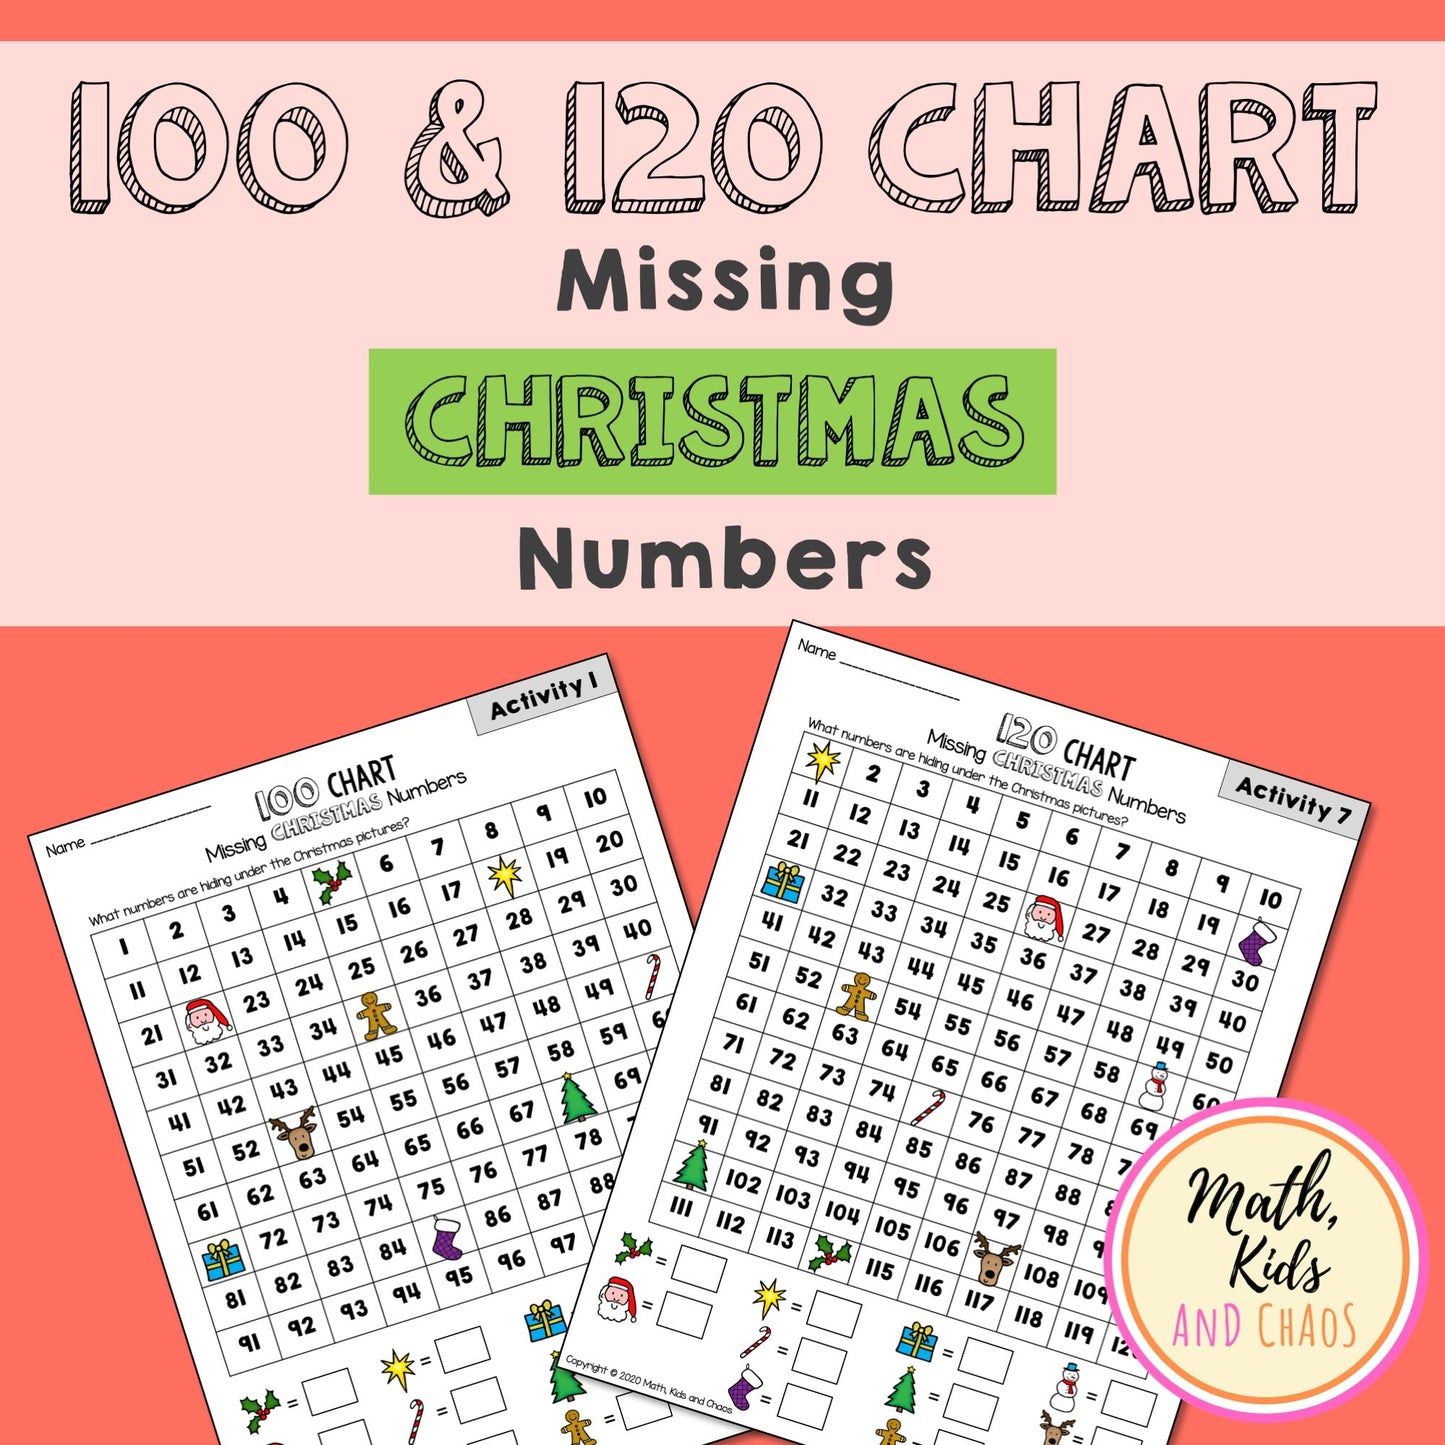 Missing Christmas Numbers (hundreds/120 chart activities)